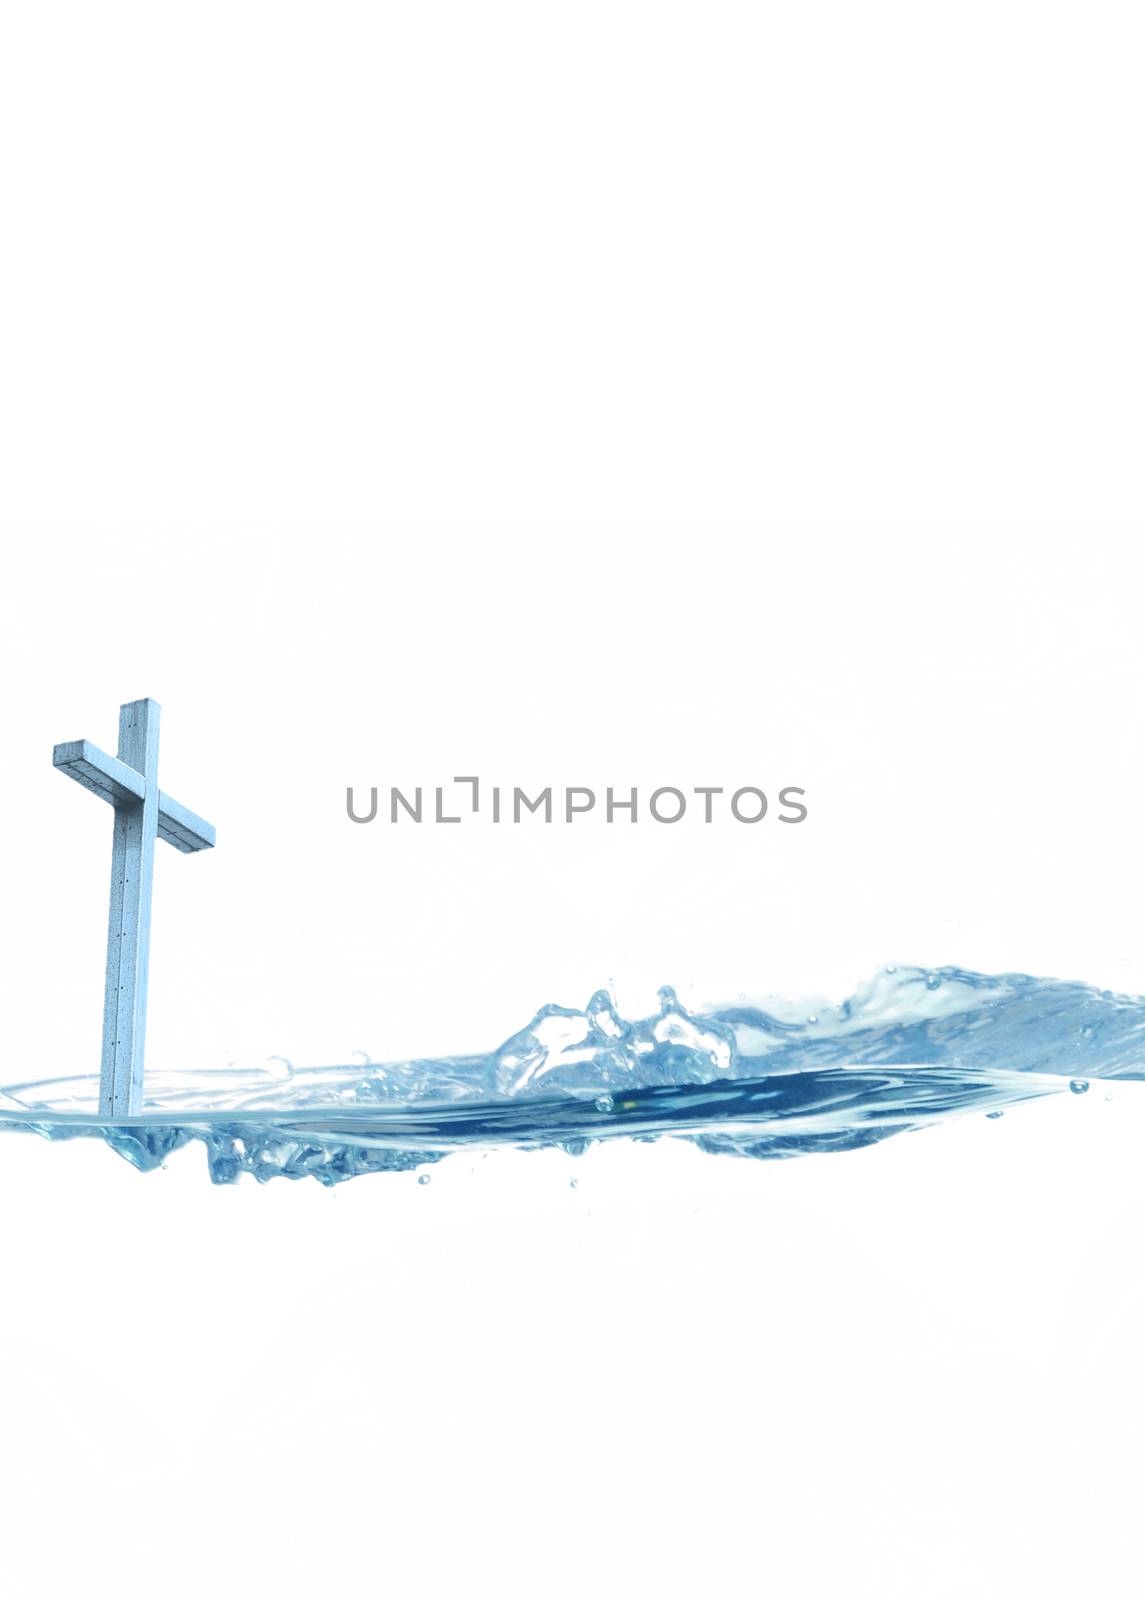 Holy water by ftlaudgirl